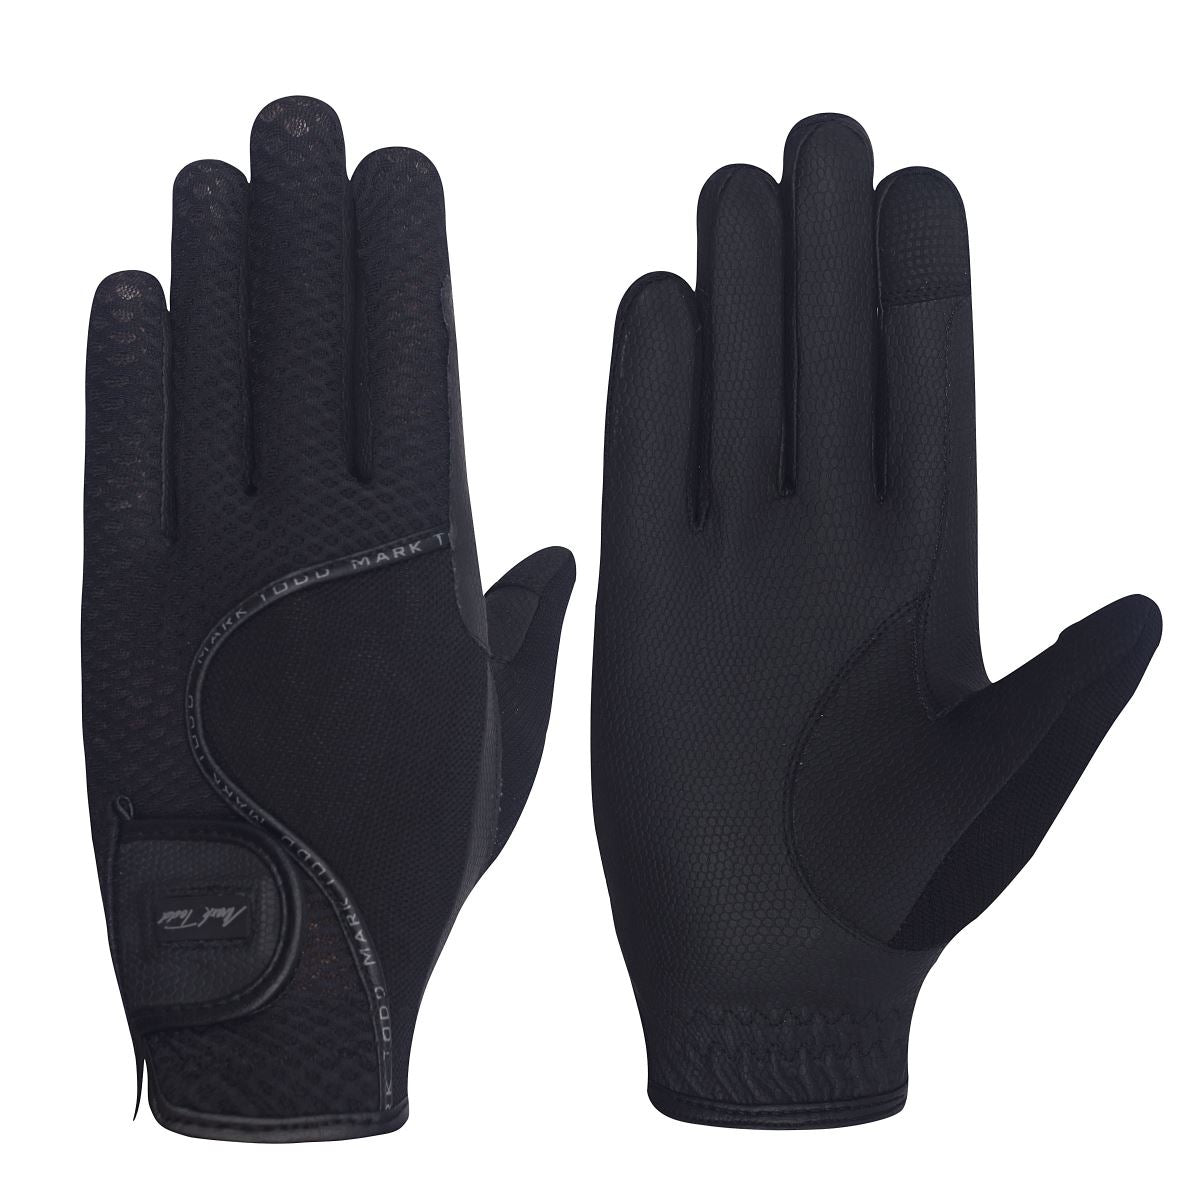 Mark Todd ProVent Horse Riding Gloves - Just Horse Riders